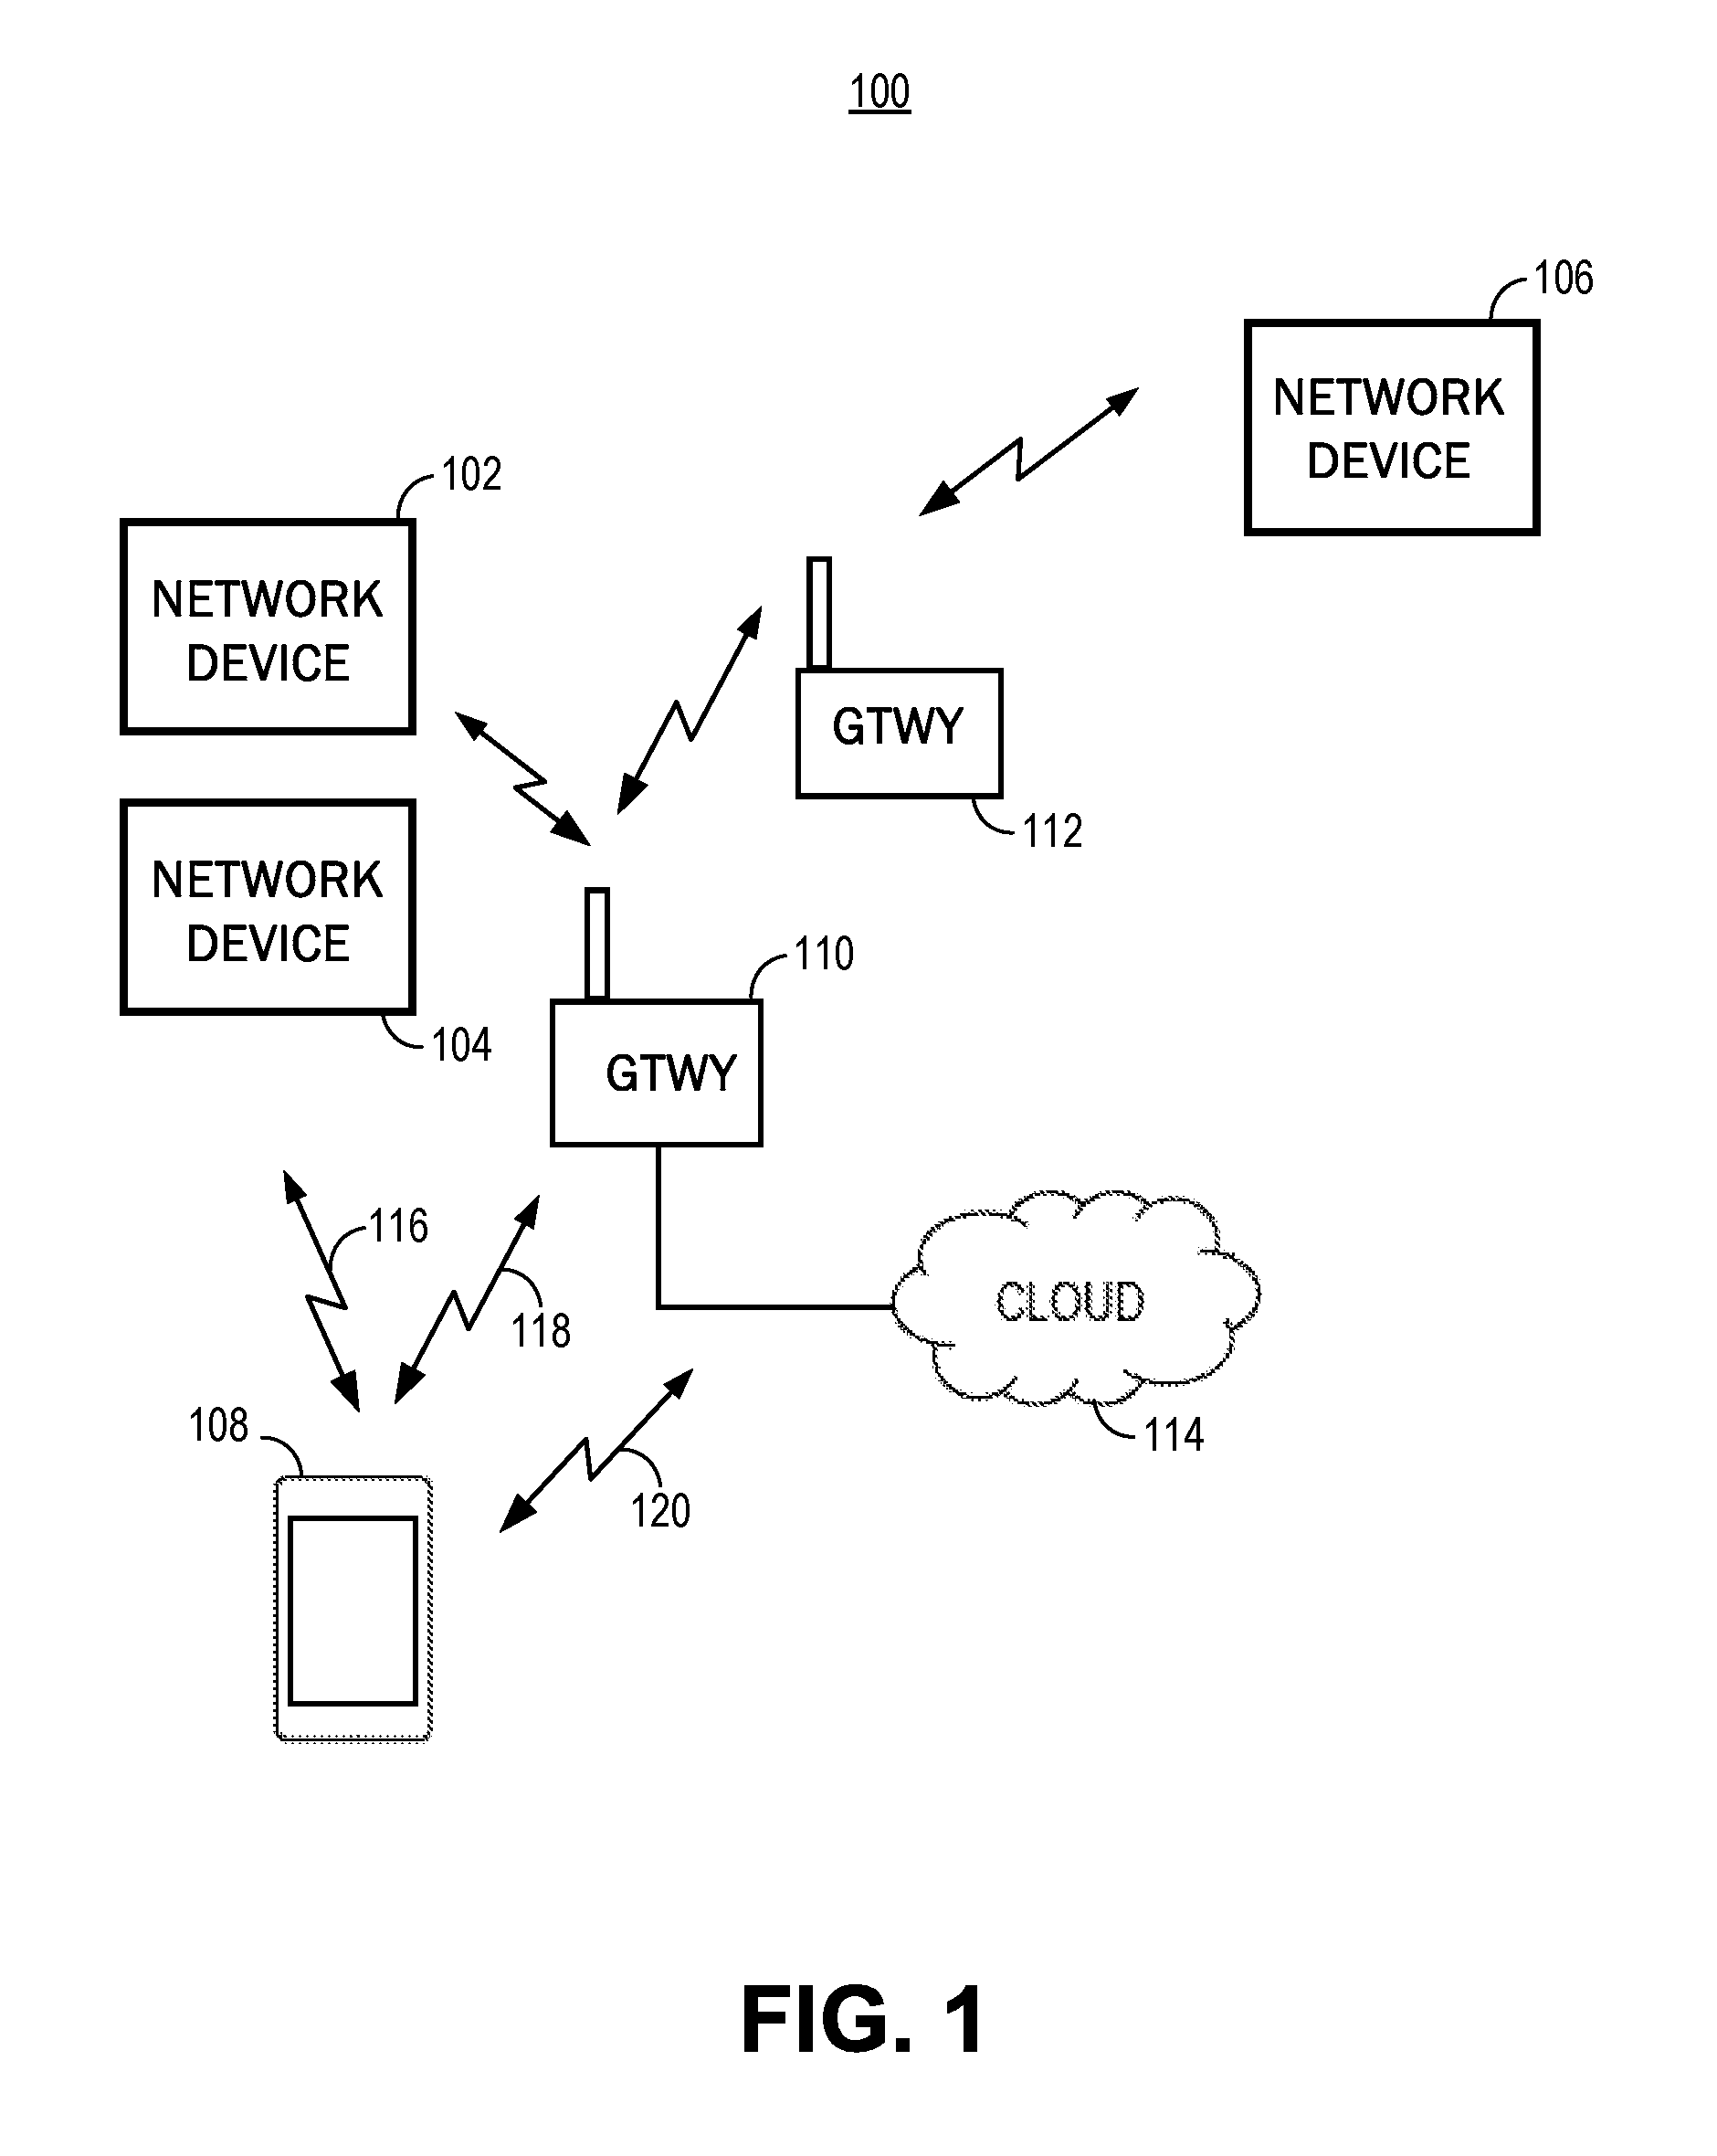 Associating devices and users with a local area network using network identifiers